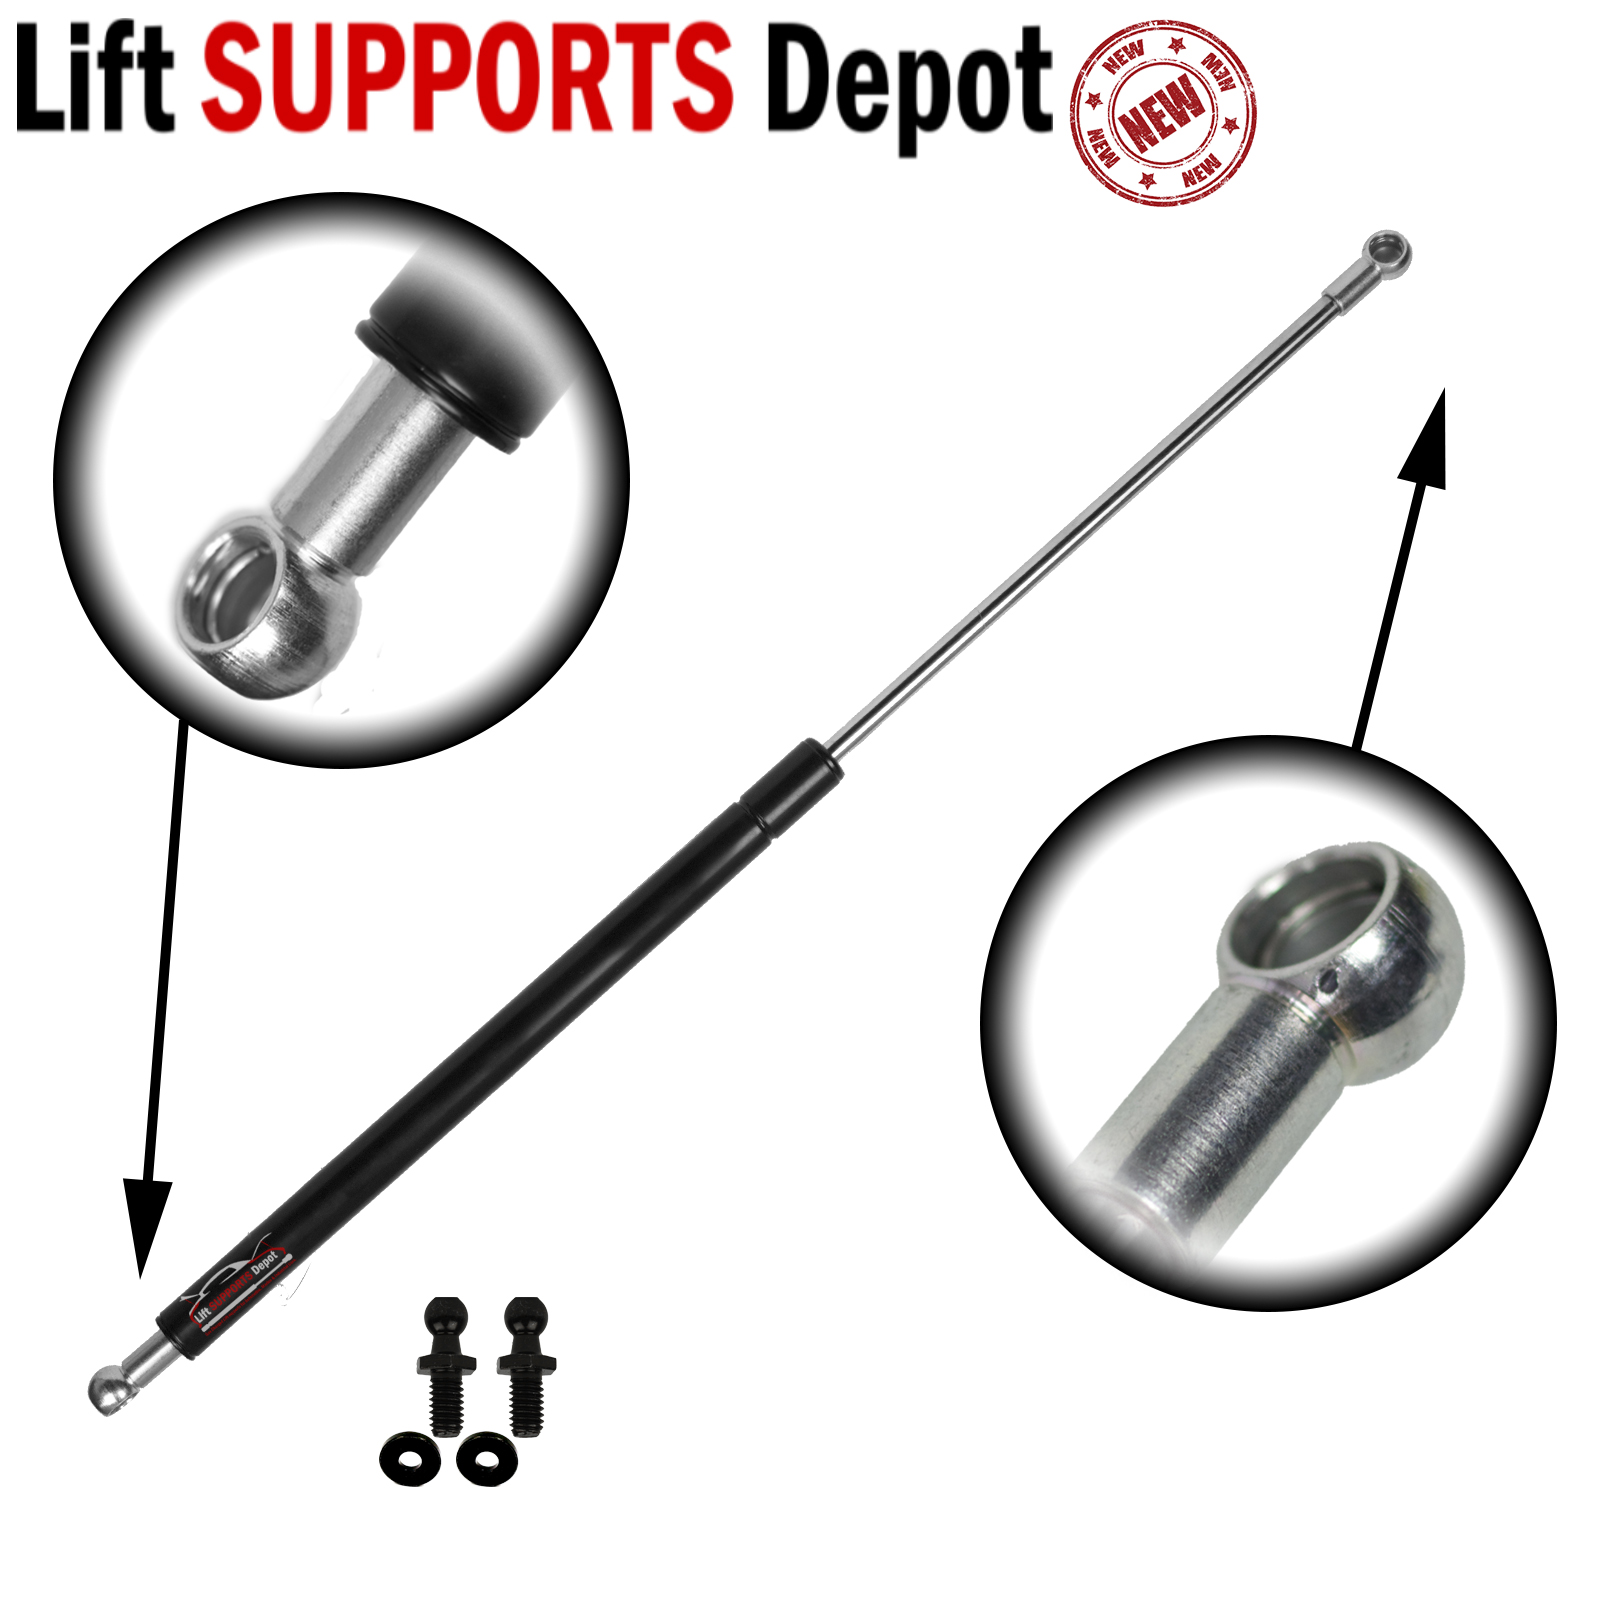 23.70 Inch Lift Supports Depot PM3947 Lift Support | PM3947-W